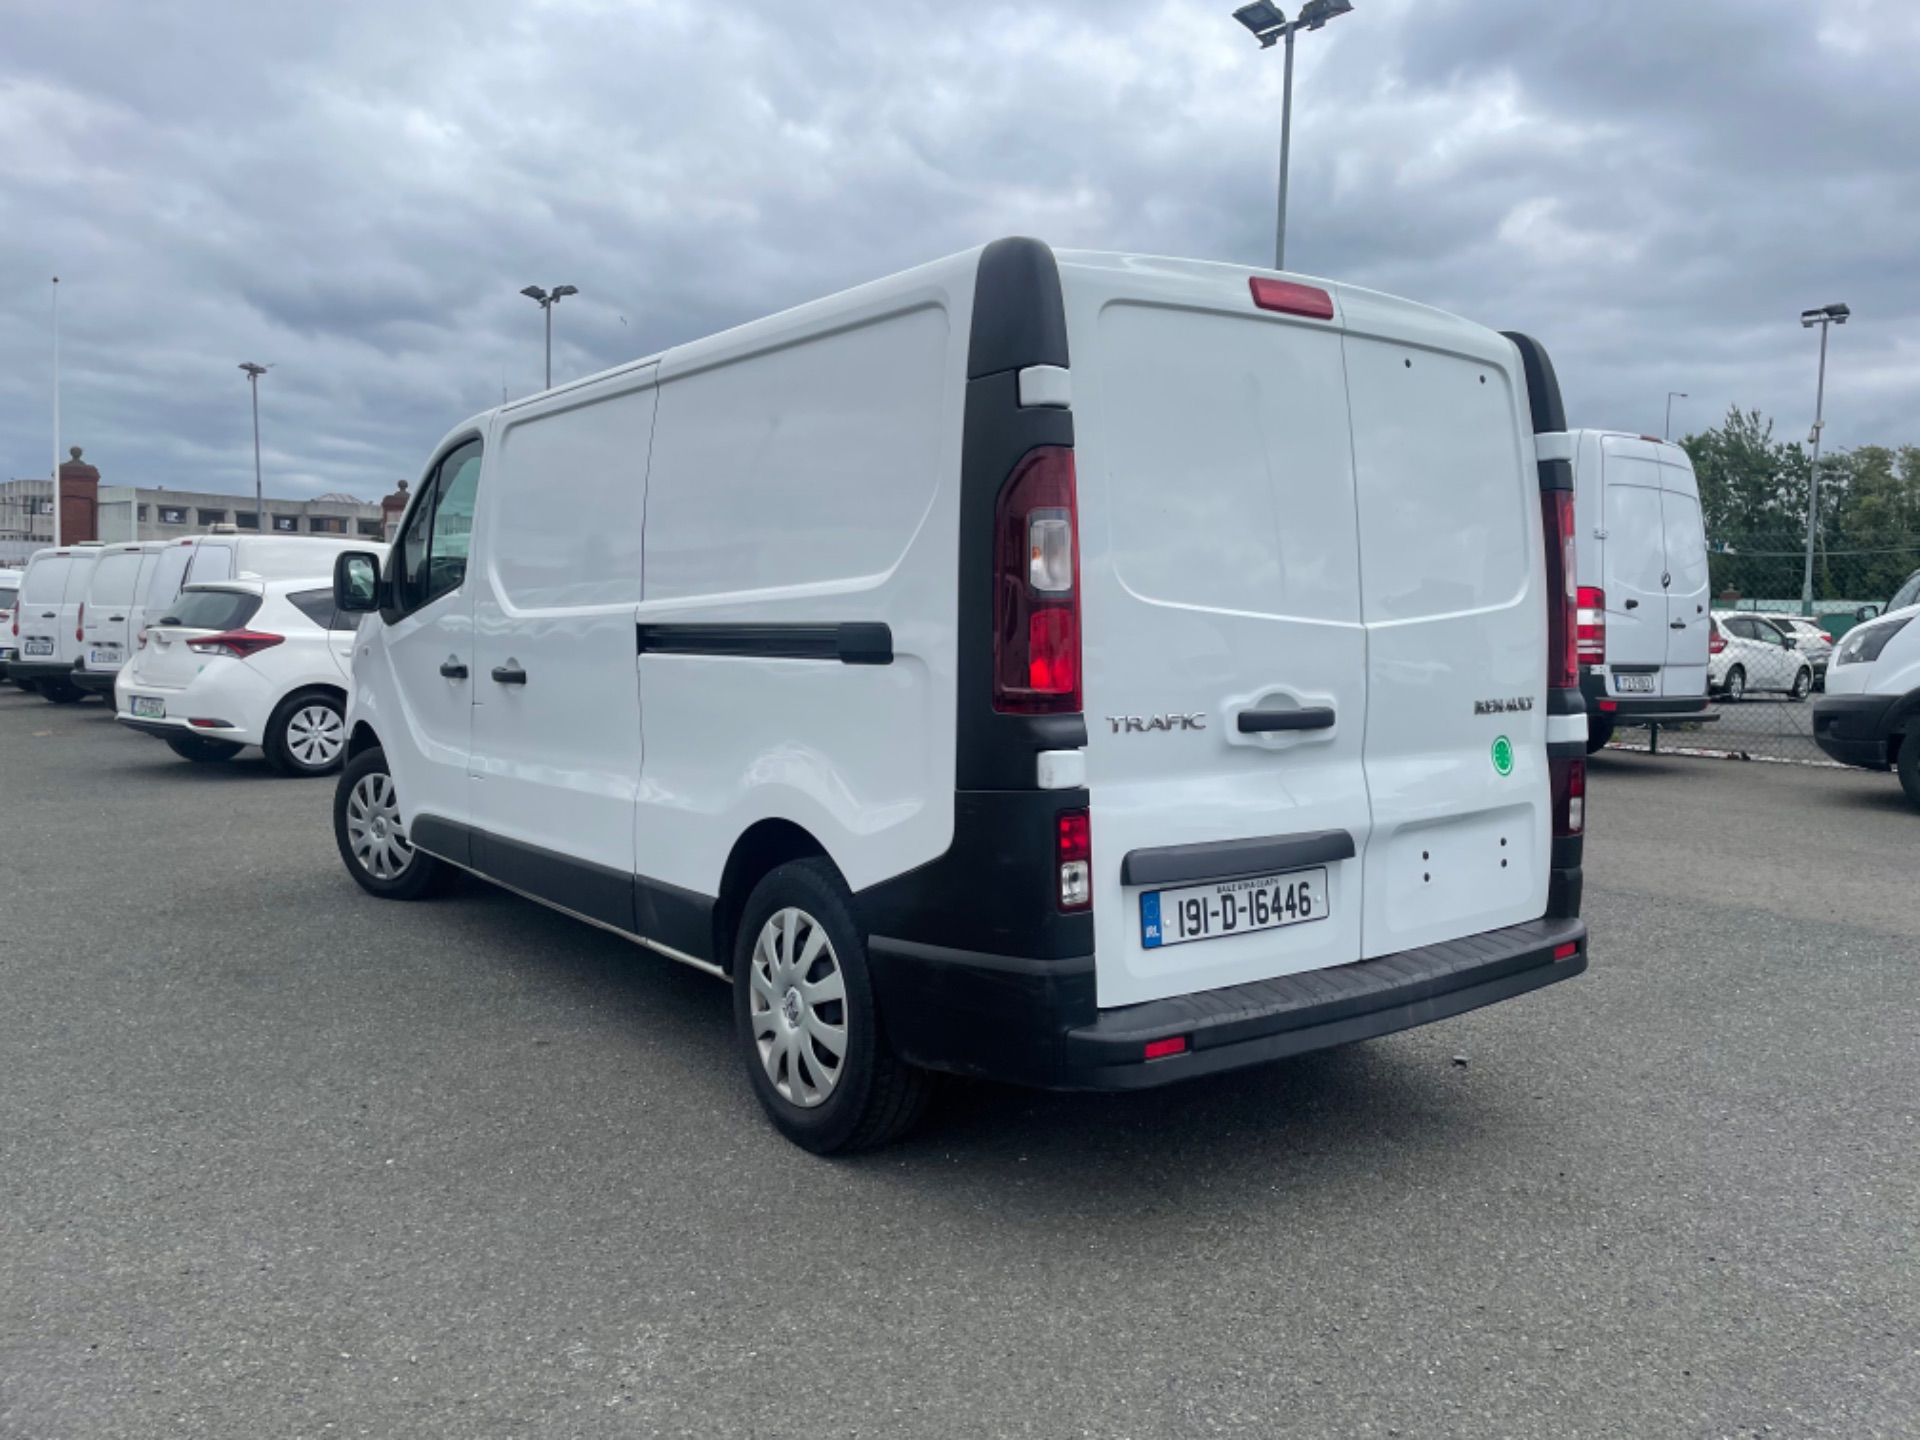 2019 Renault Trafic LL29 DCI 120 Business (191D16446) Thumbnail 4